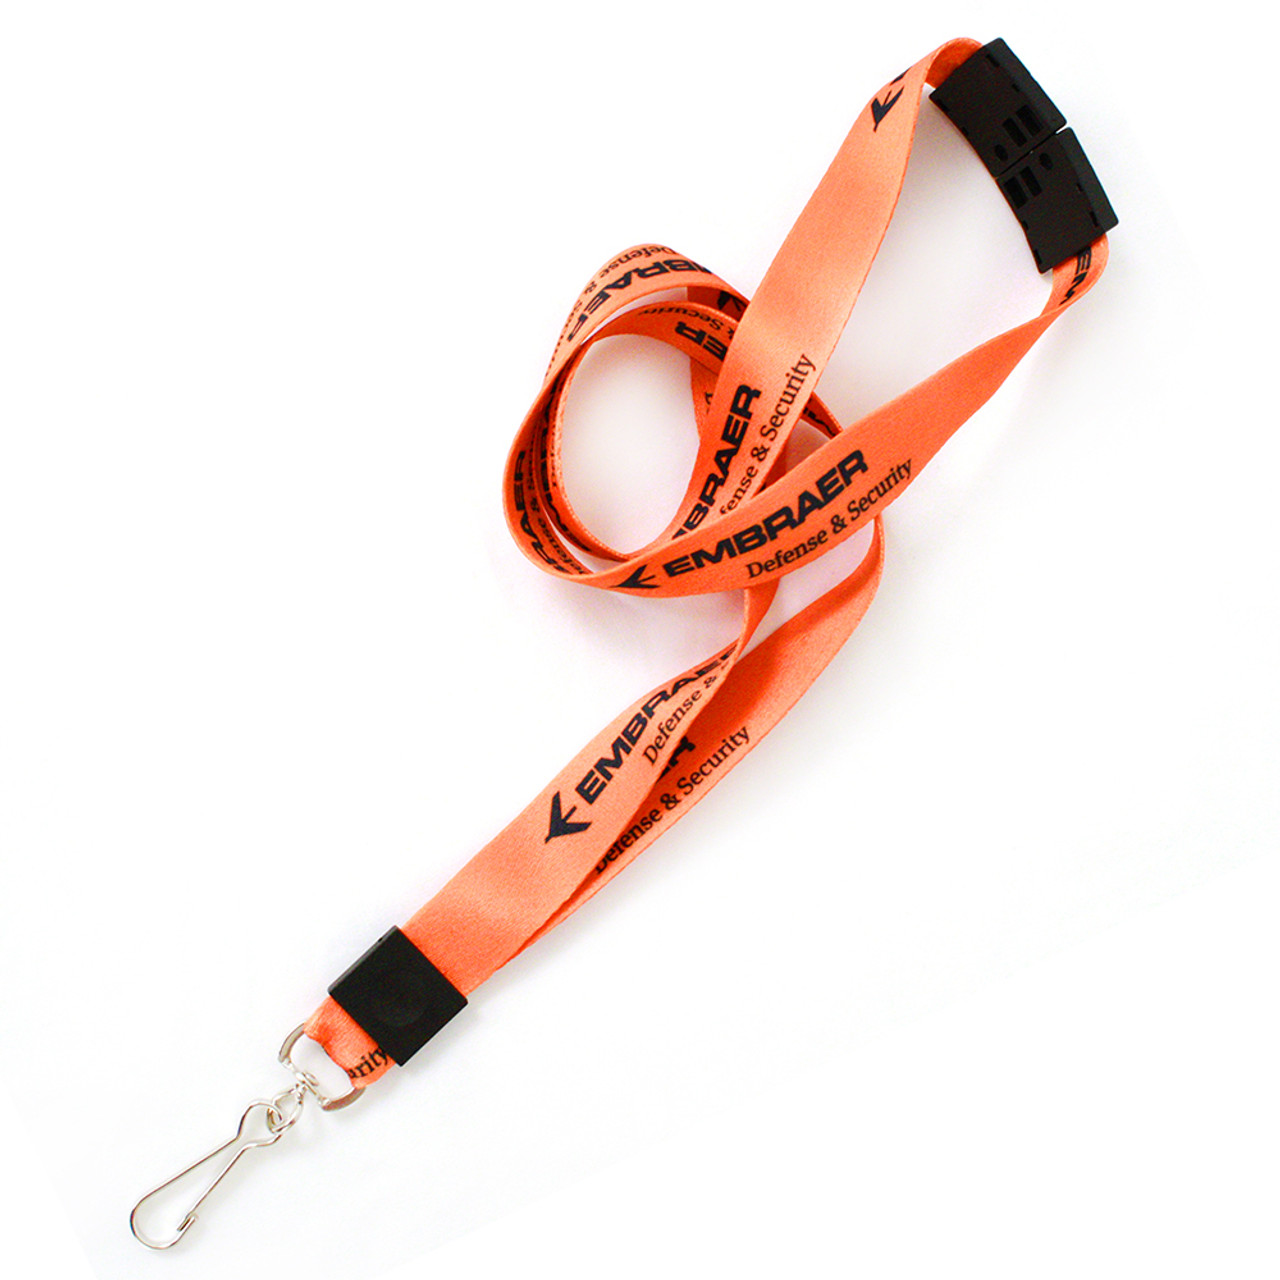 3/4Dye Sublimation Lanyards with Safety Breakaway